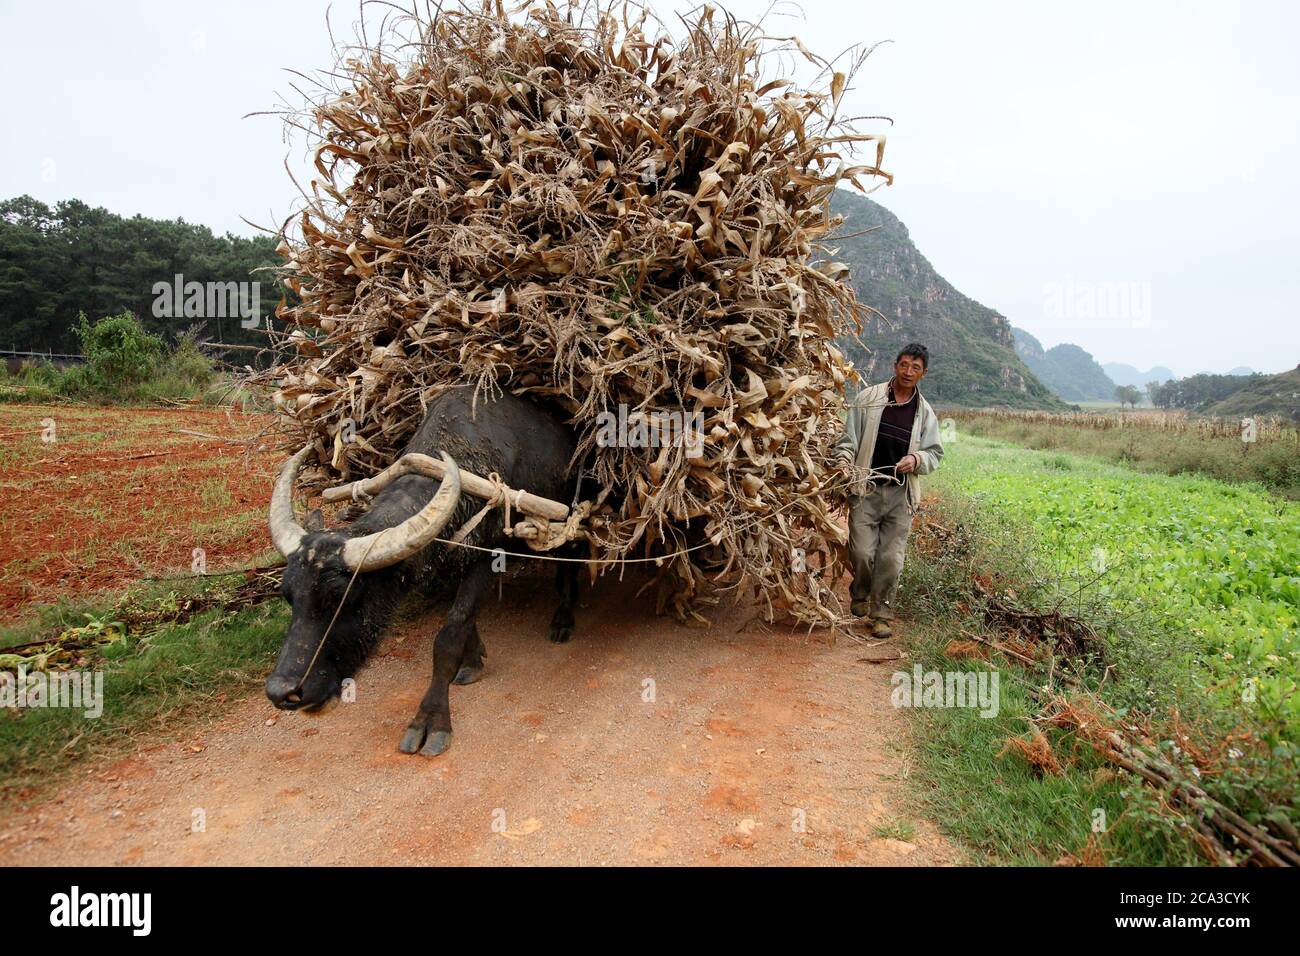 Farmer and his water buffalo pulling cart with hay, yunnan, People's Republic of China, Asia Stock Photo